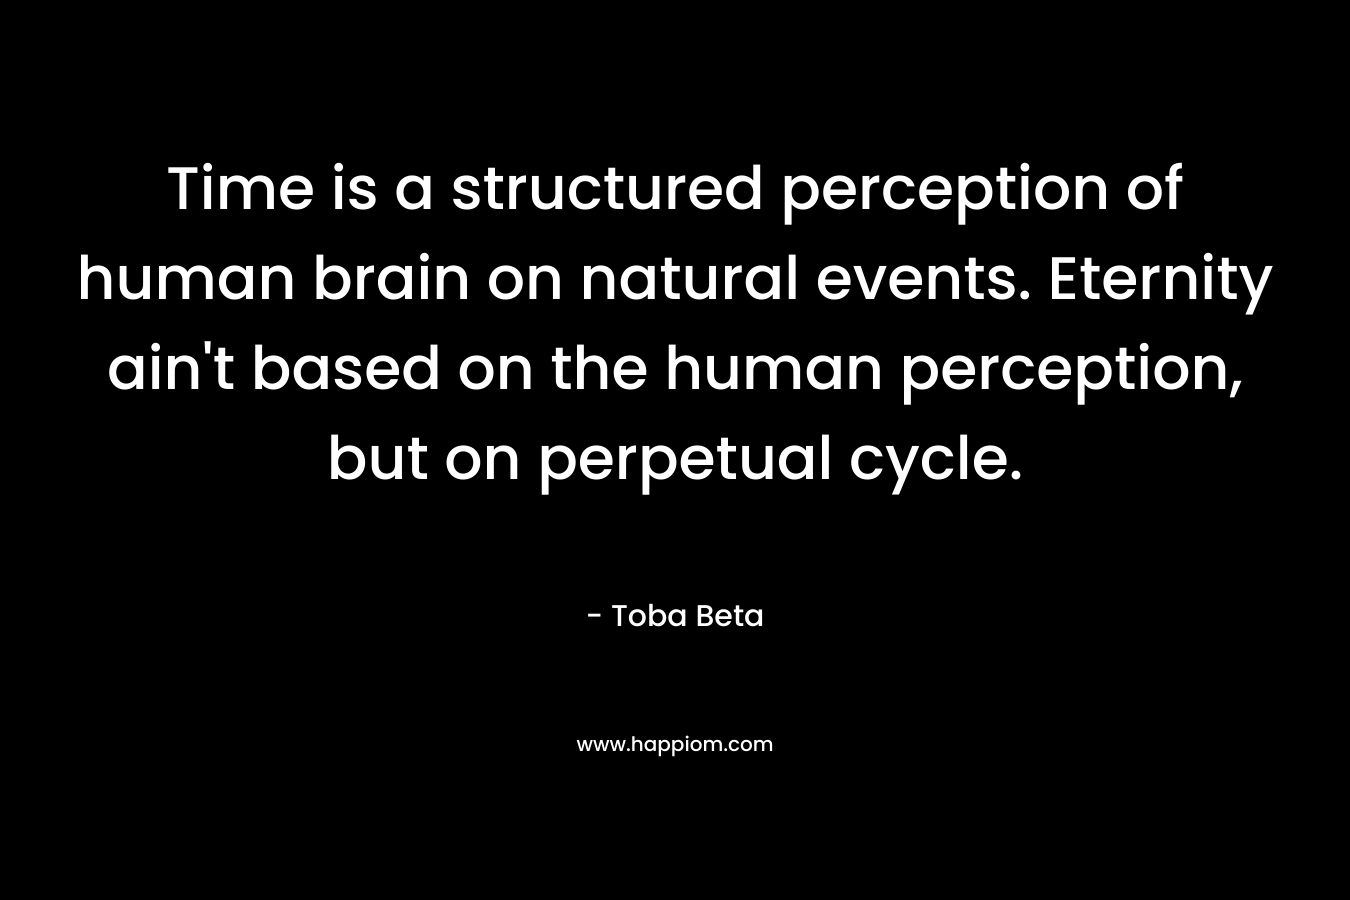 Time is a structured perception of human brain on natural events. Eternity ain’t based on the human perception, but on perpetual cycle. – Toba Beta